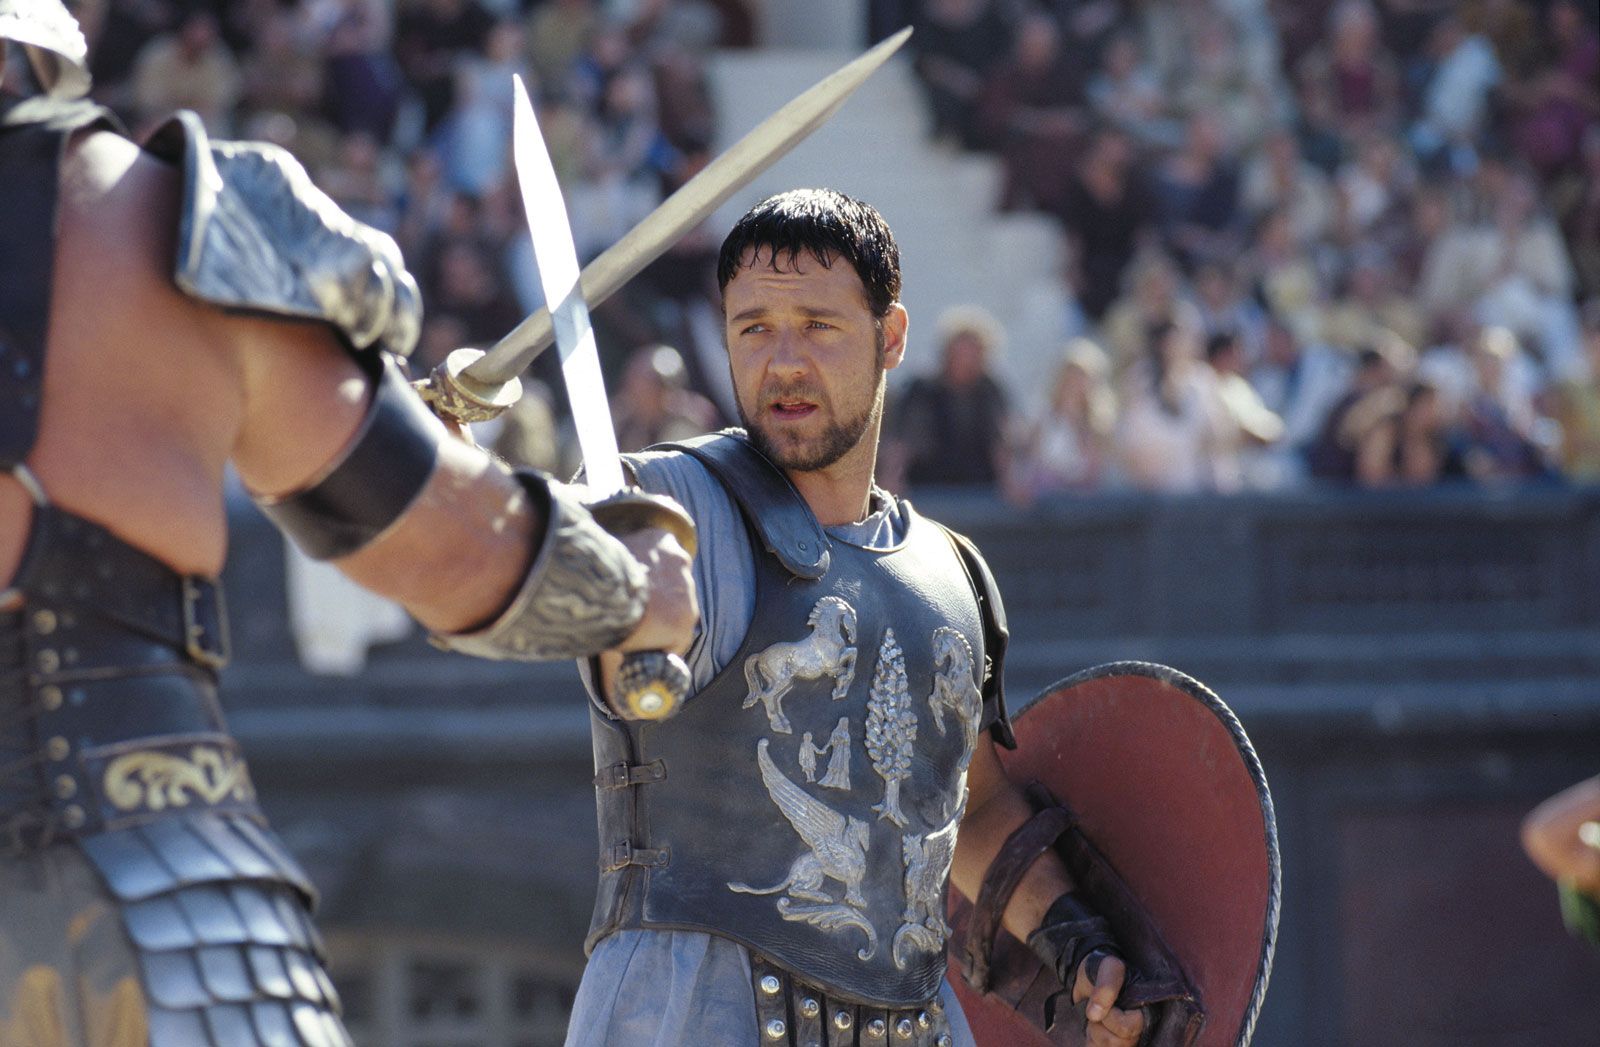 Russell Crowe in one of the scenes of Gladiator